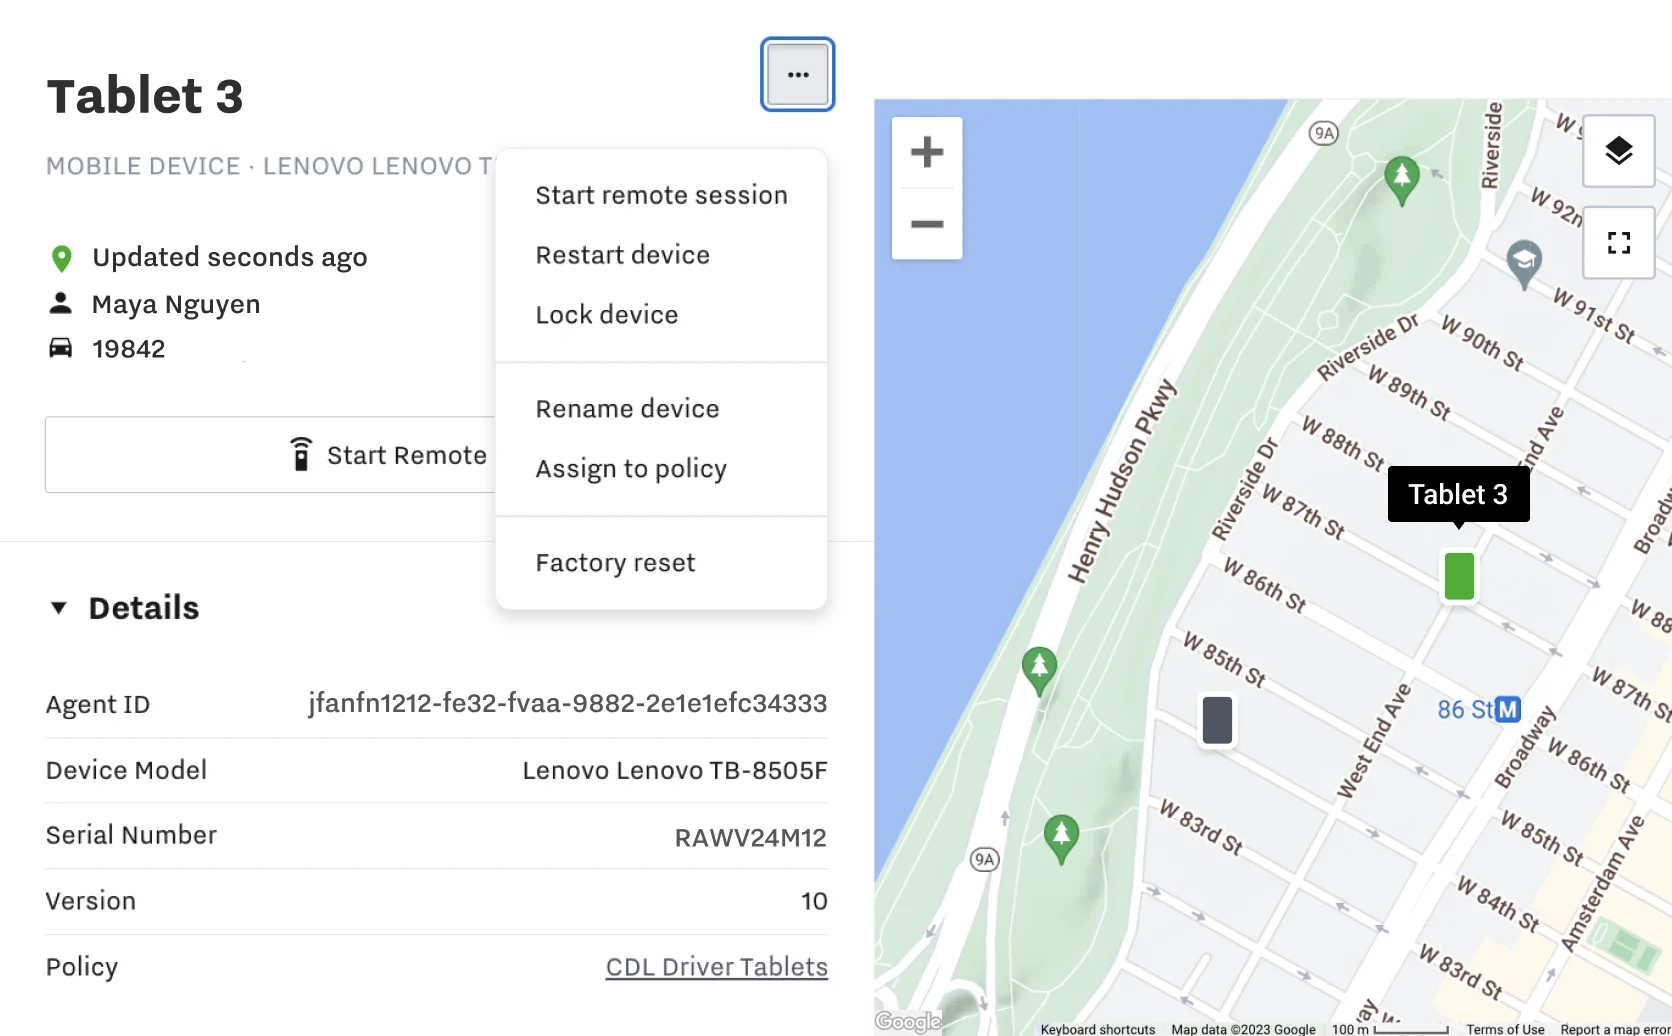 Product image from the Samsara dashboard including mobile device information and a map with mobile device locations